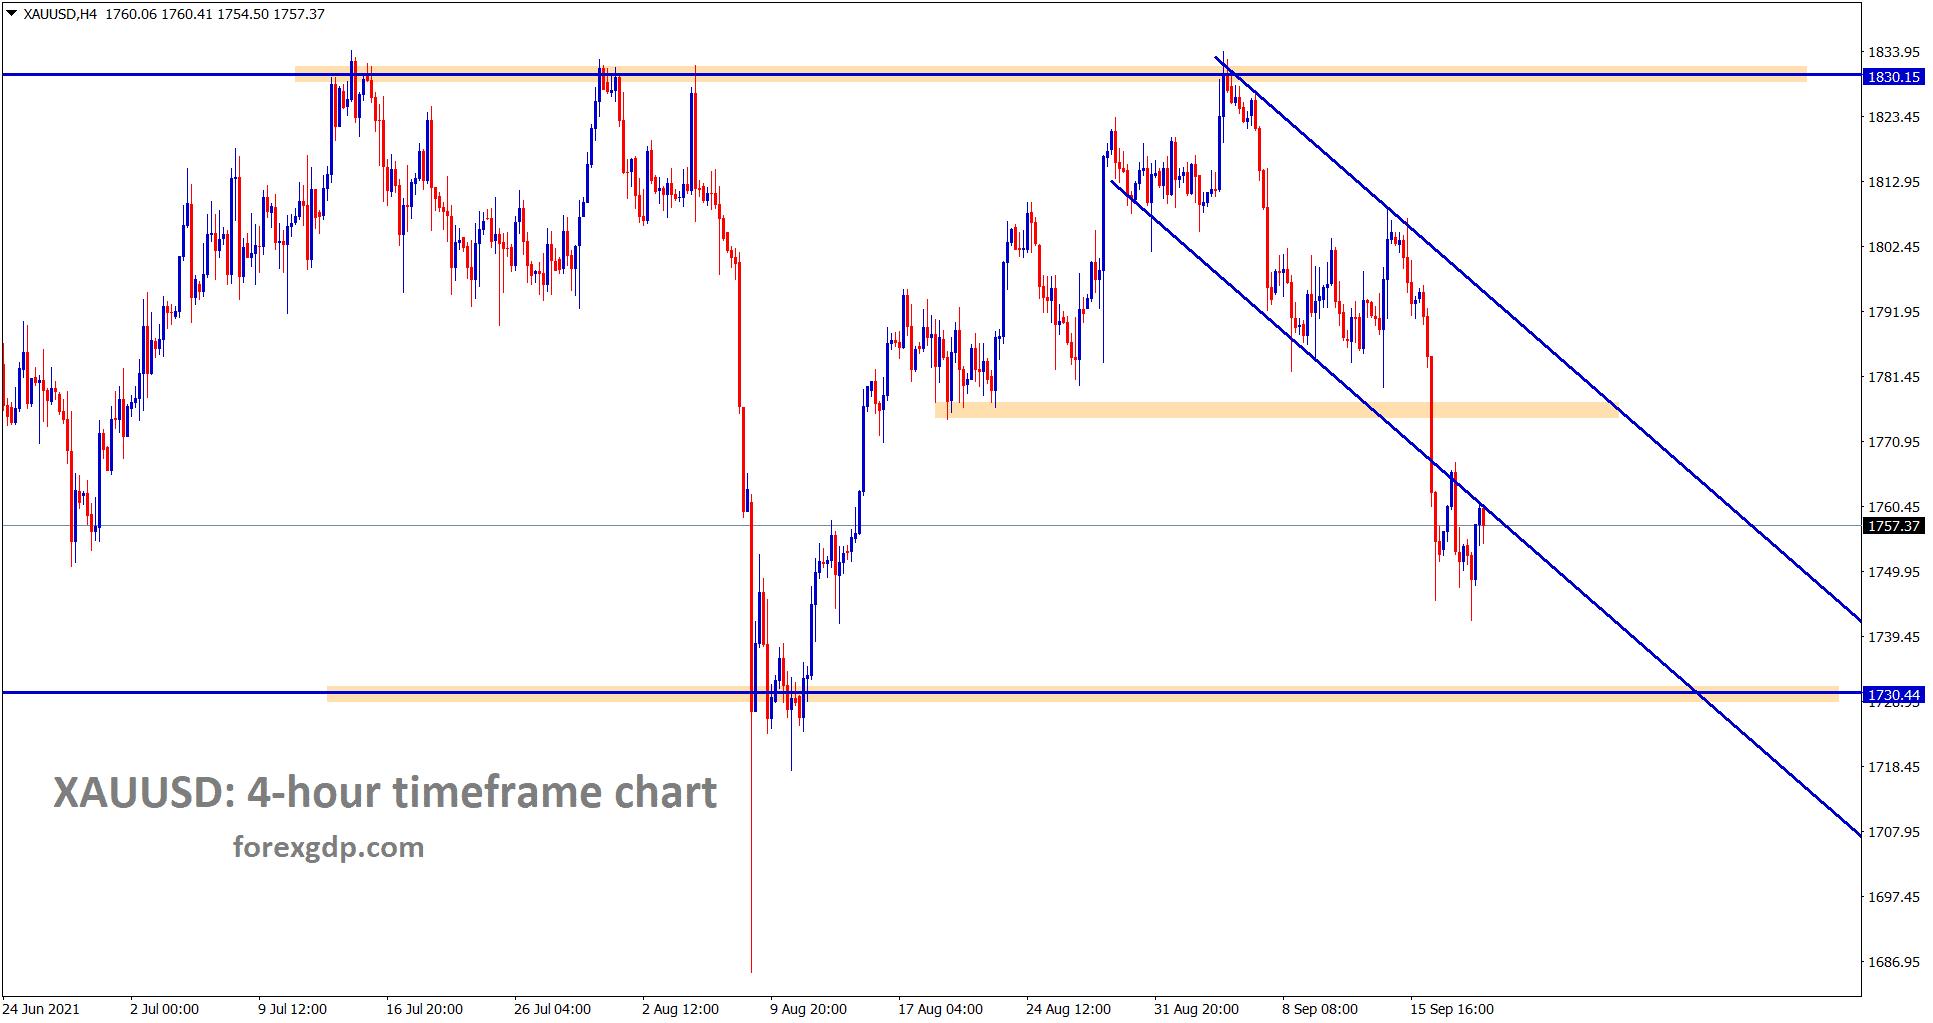 Gold is consolidating now after breaking the descending channel